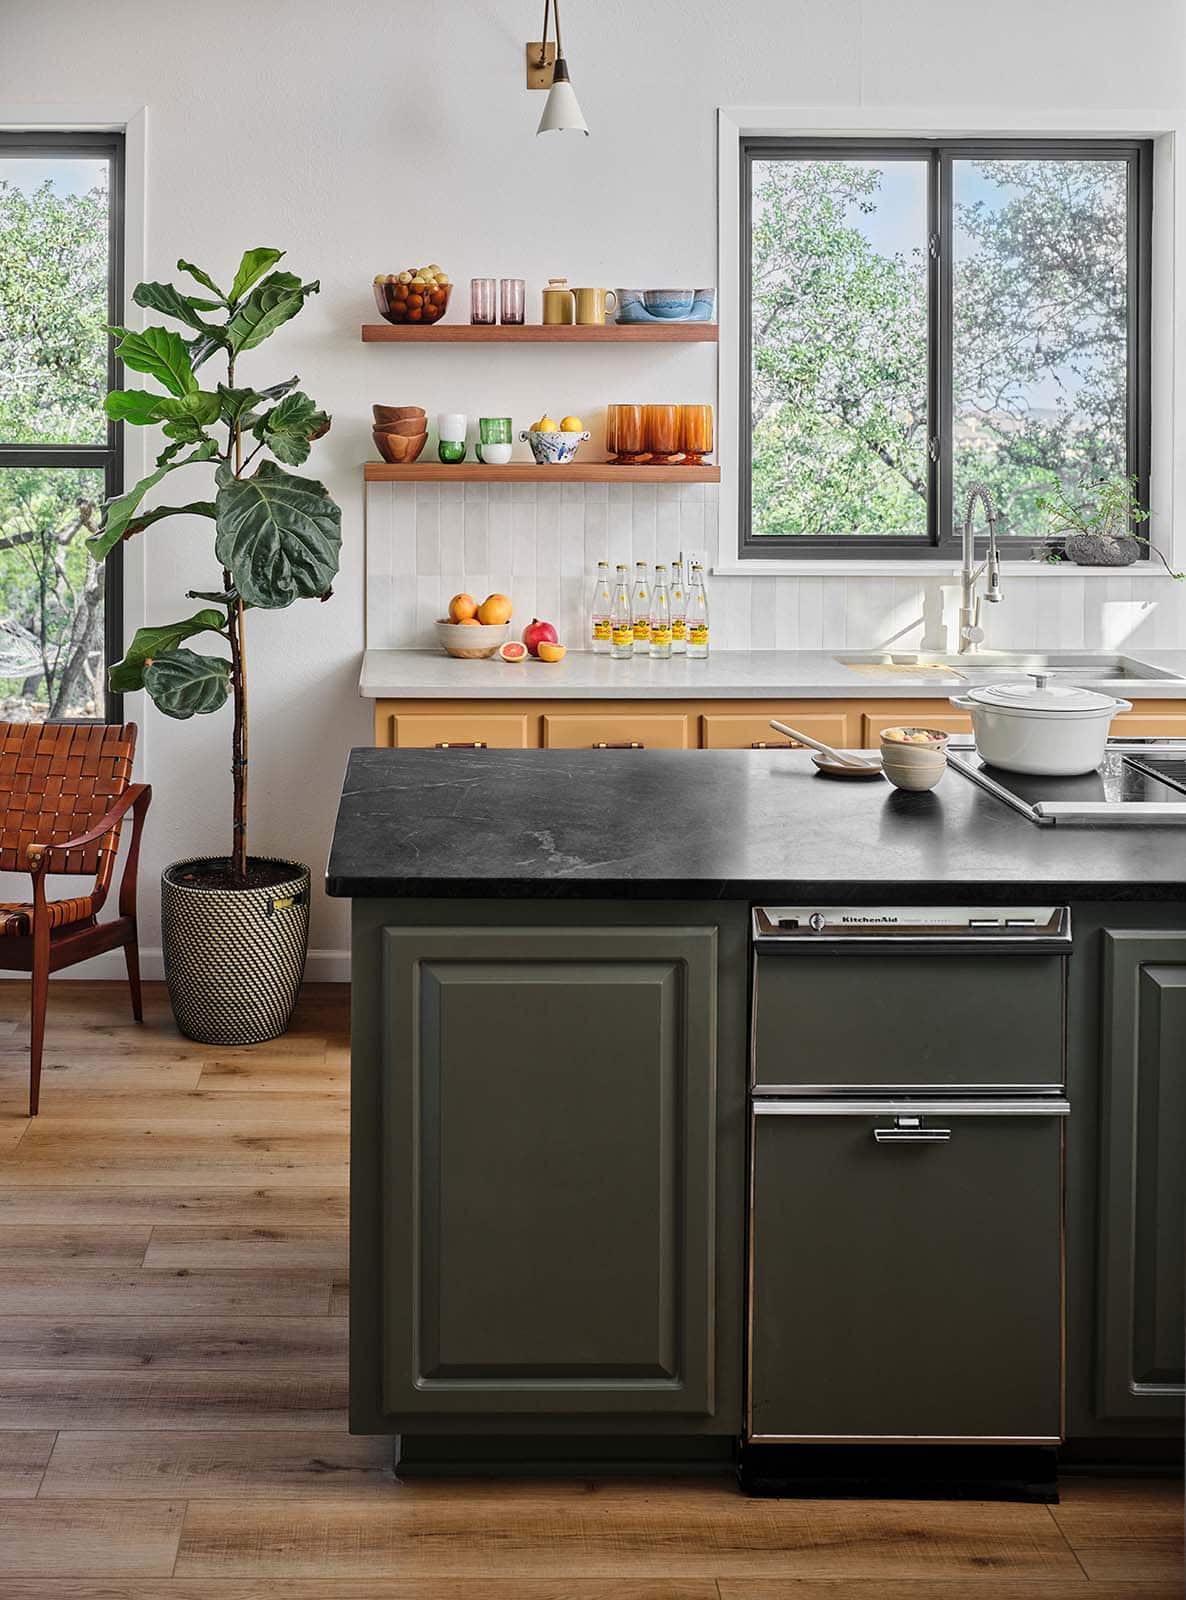 warm-modern-kitchen-painted-in-sherwin-williams-thunderous-and-chamois